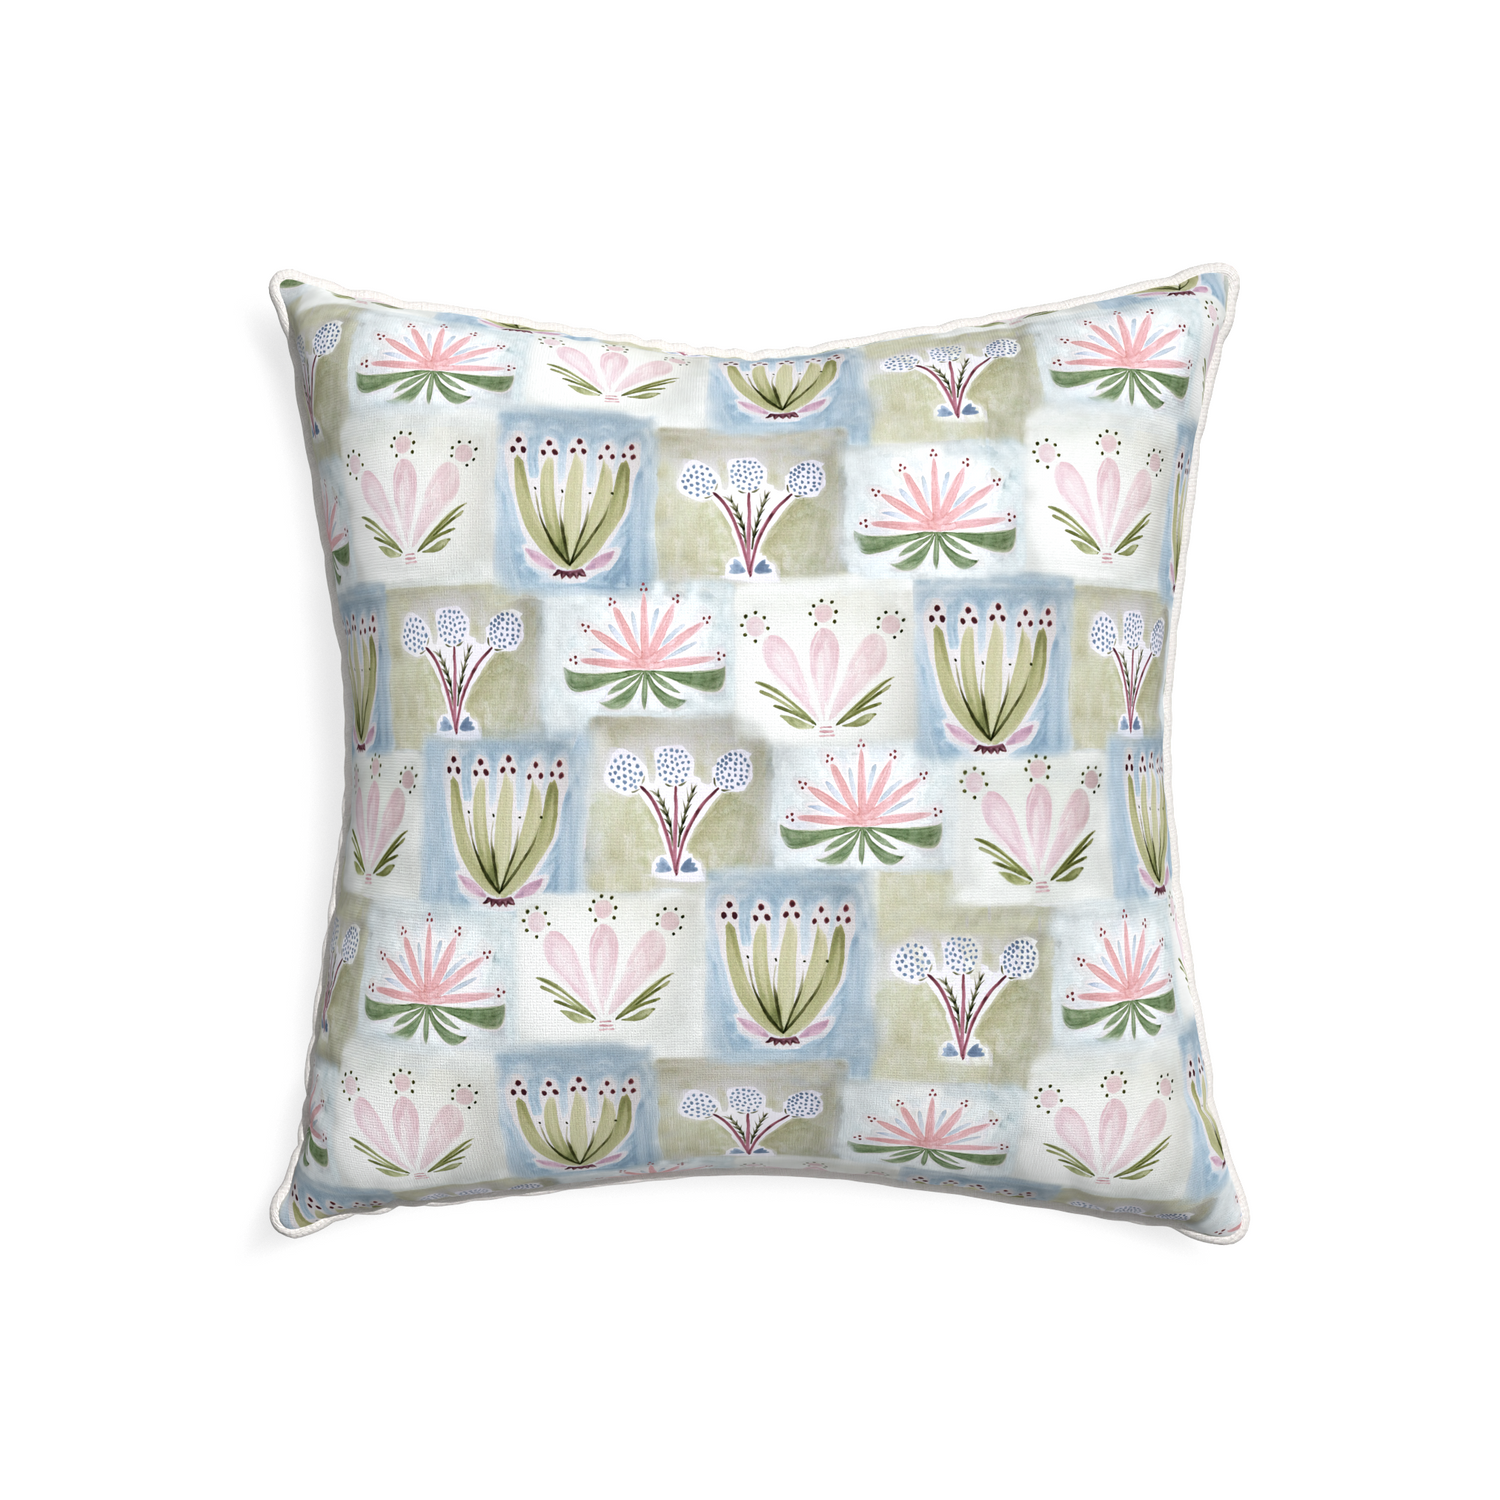 22-square harper custom hand-painted floralpillow with snow piping on white background